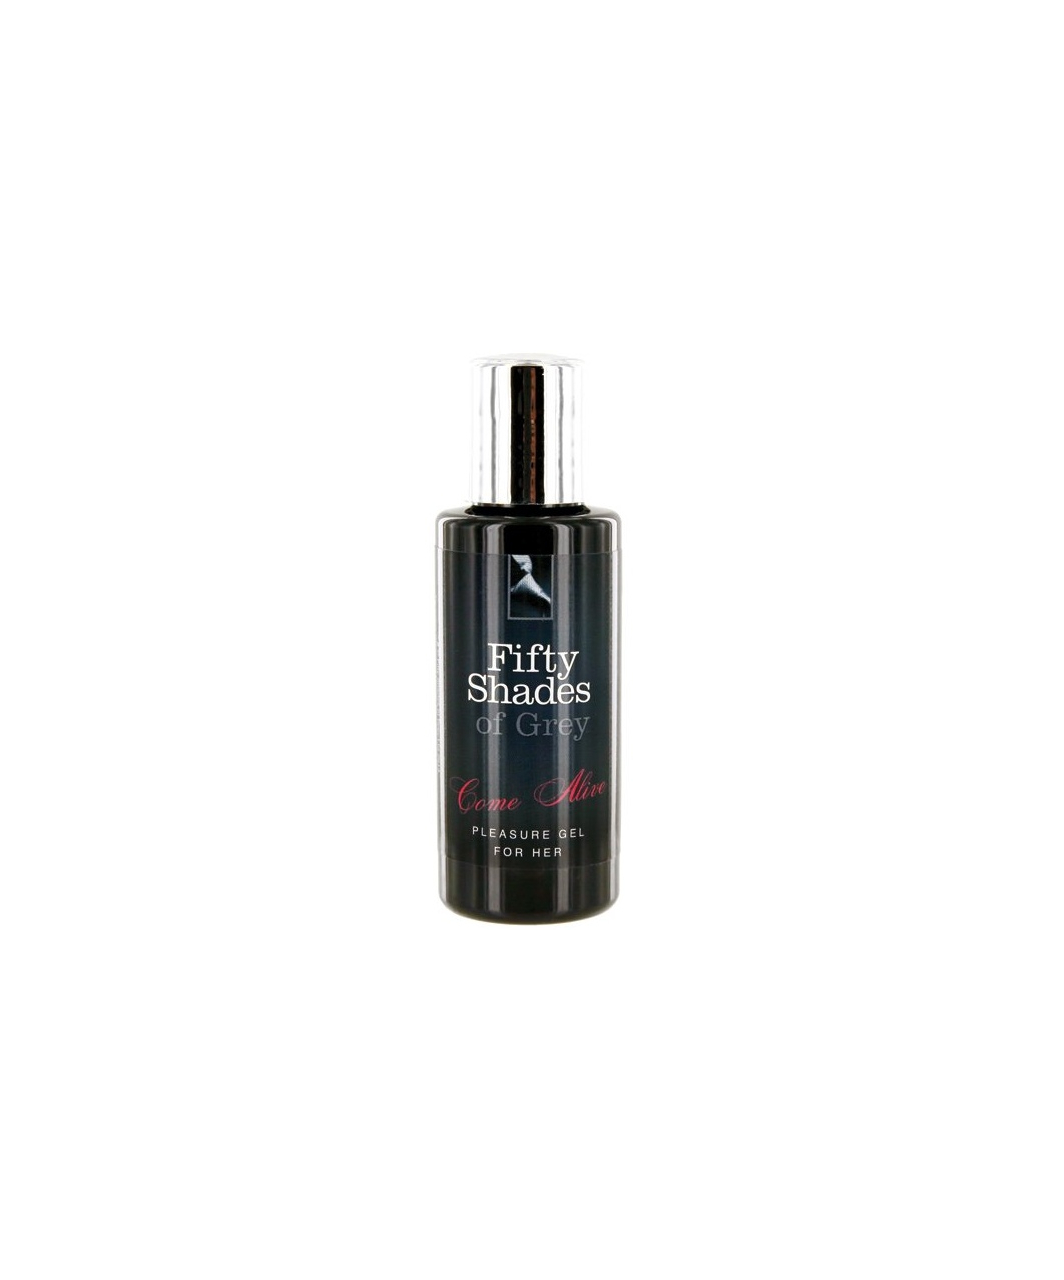 Fifty Shades of Grey Come Alive stimulating gel (30 ml)